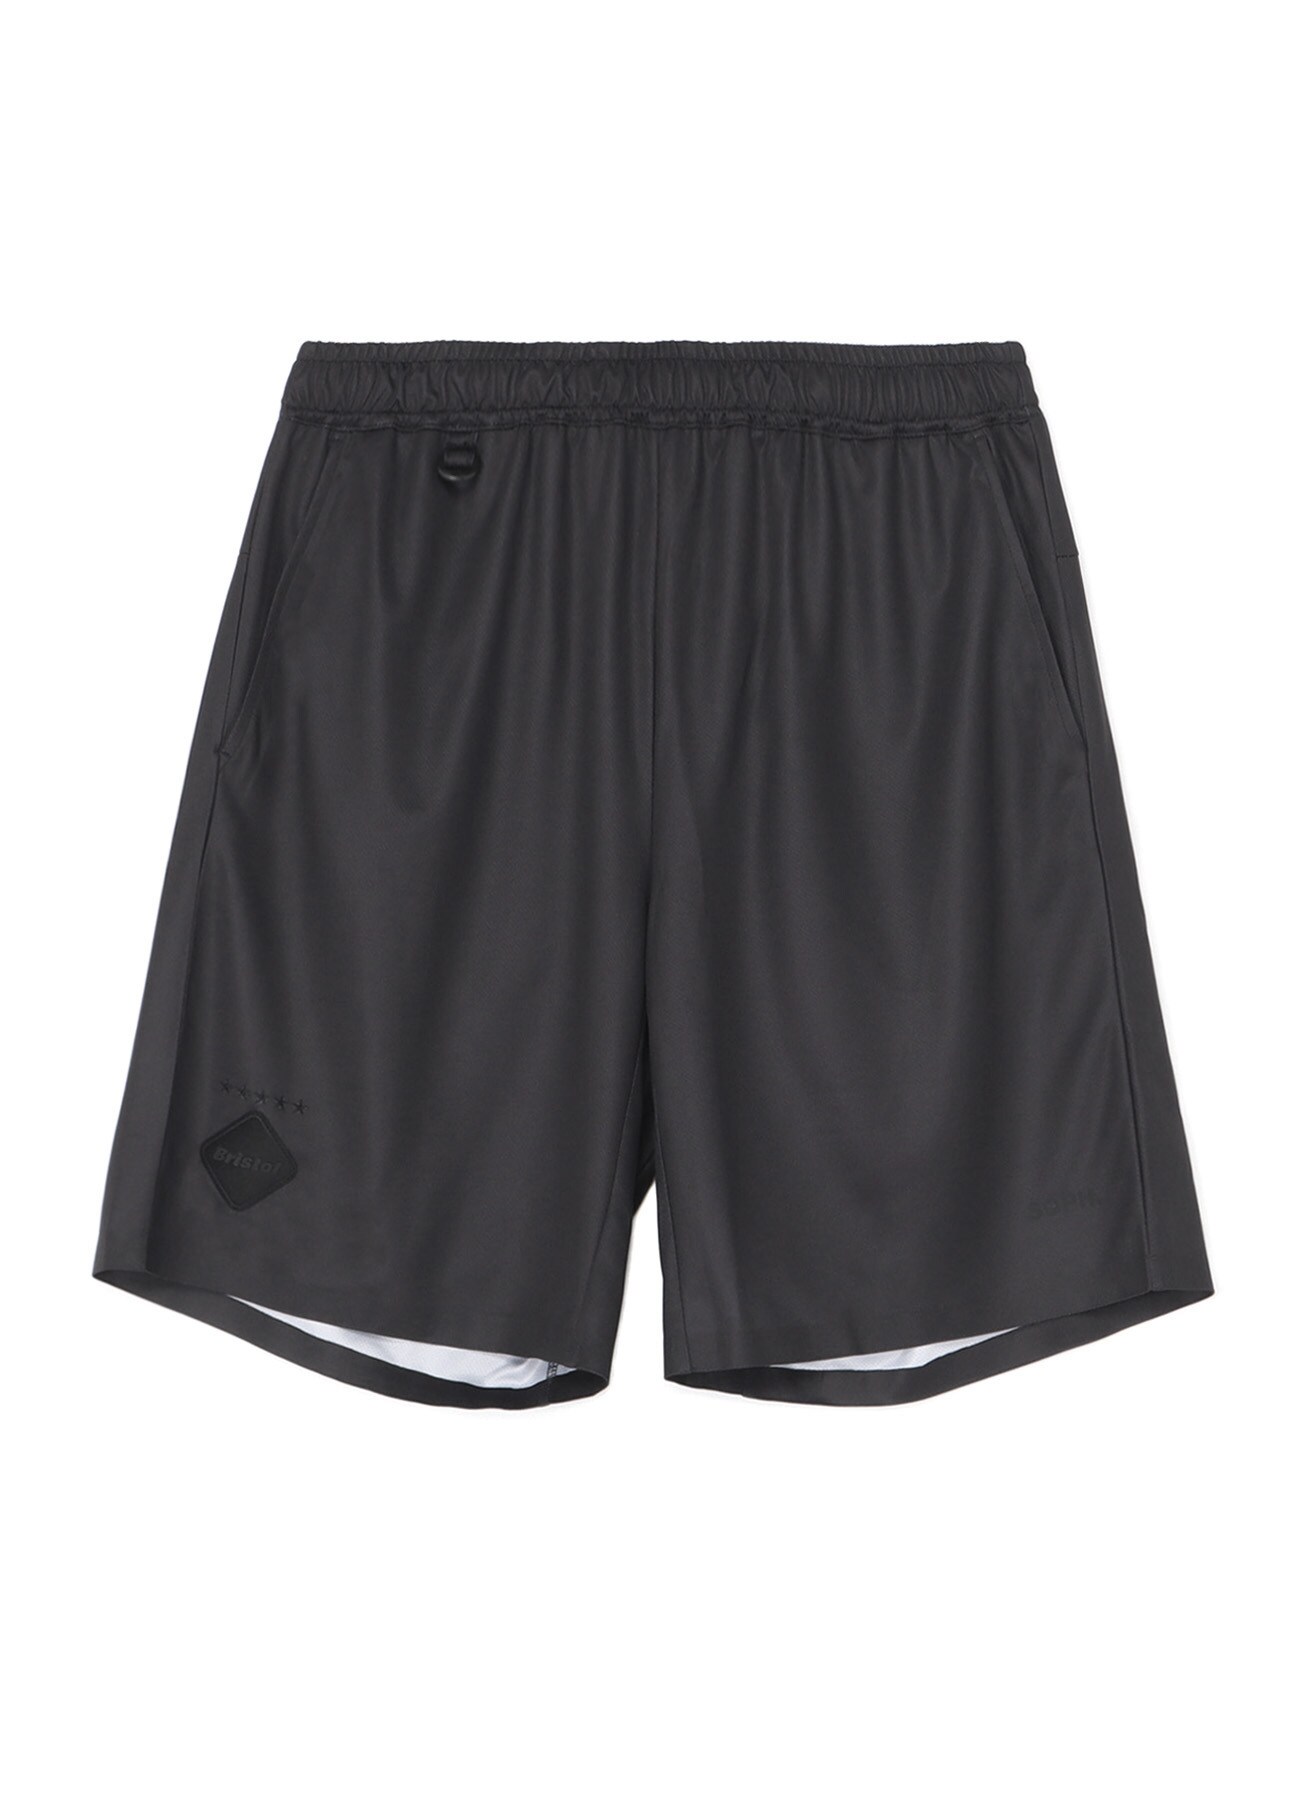 F.C.Real Bristol OVER SIZED GAME SHORTS